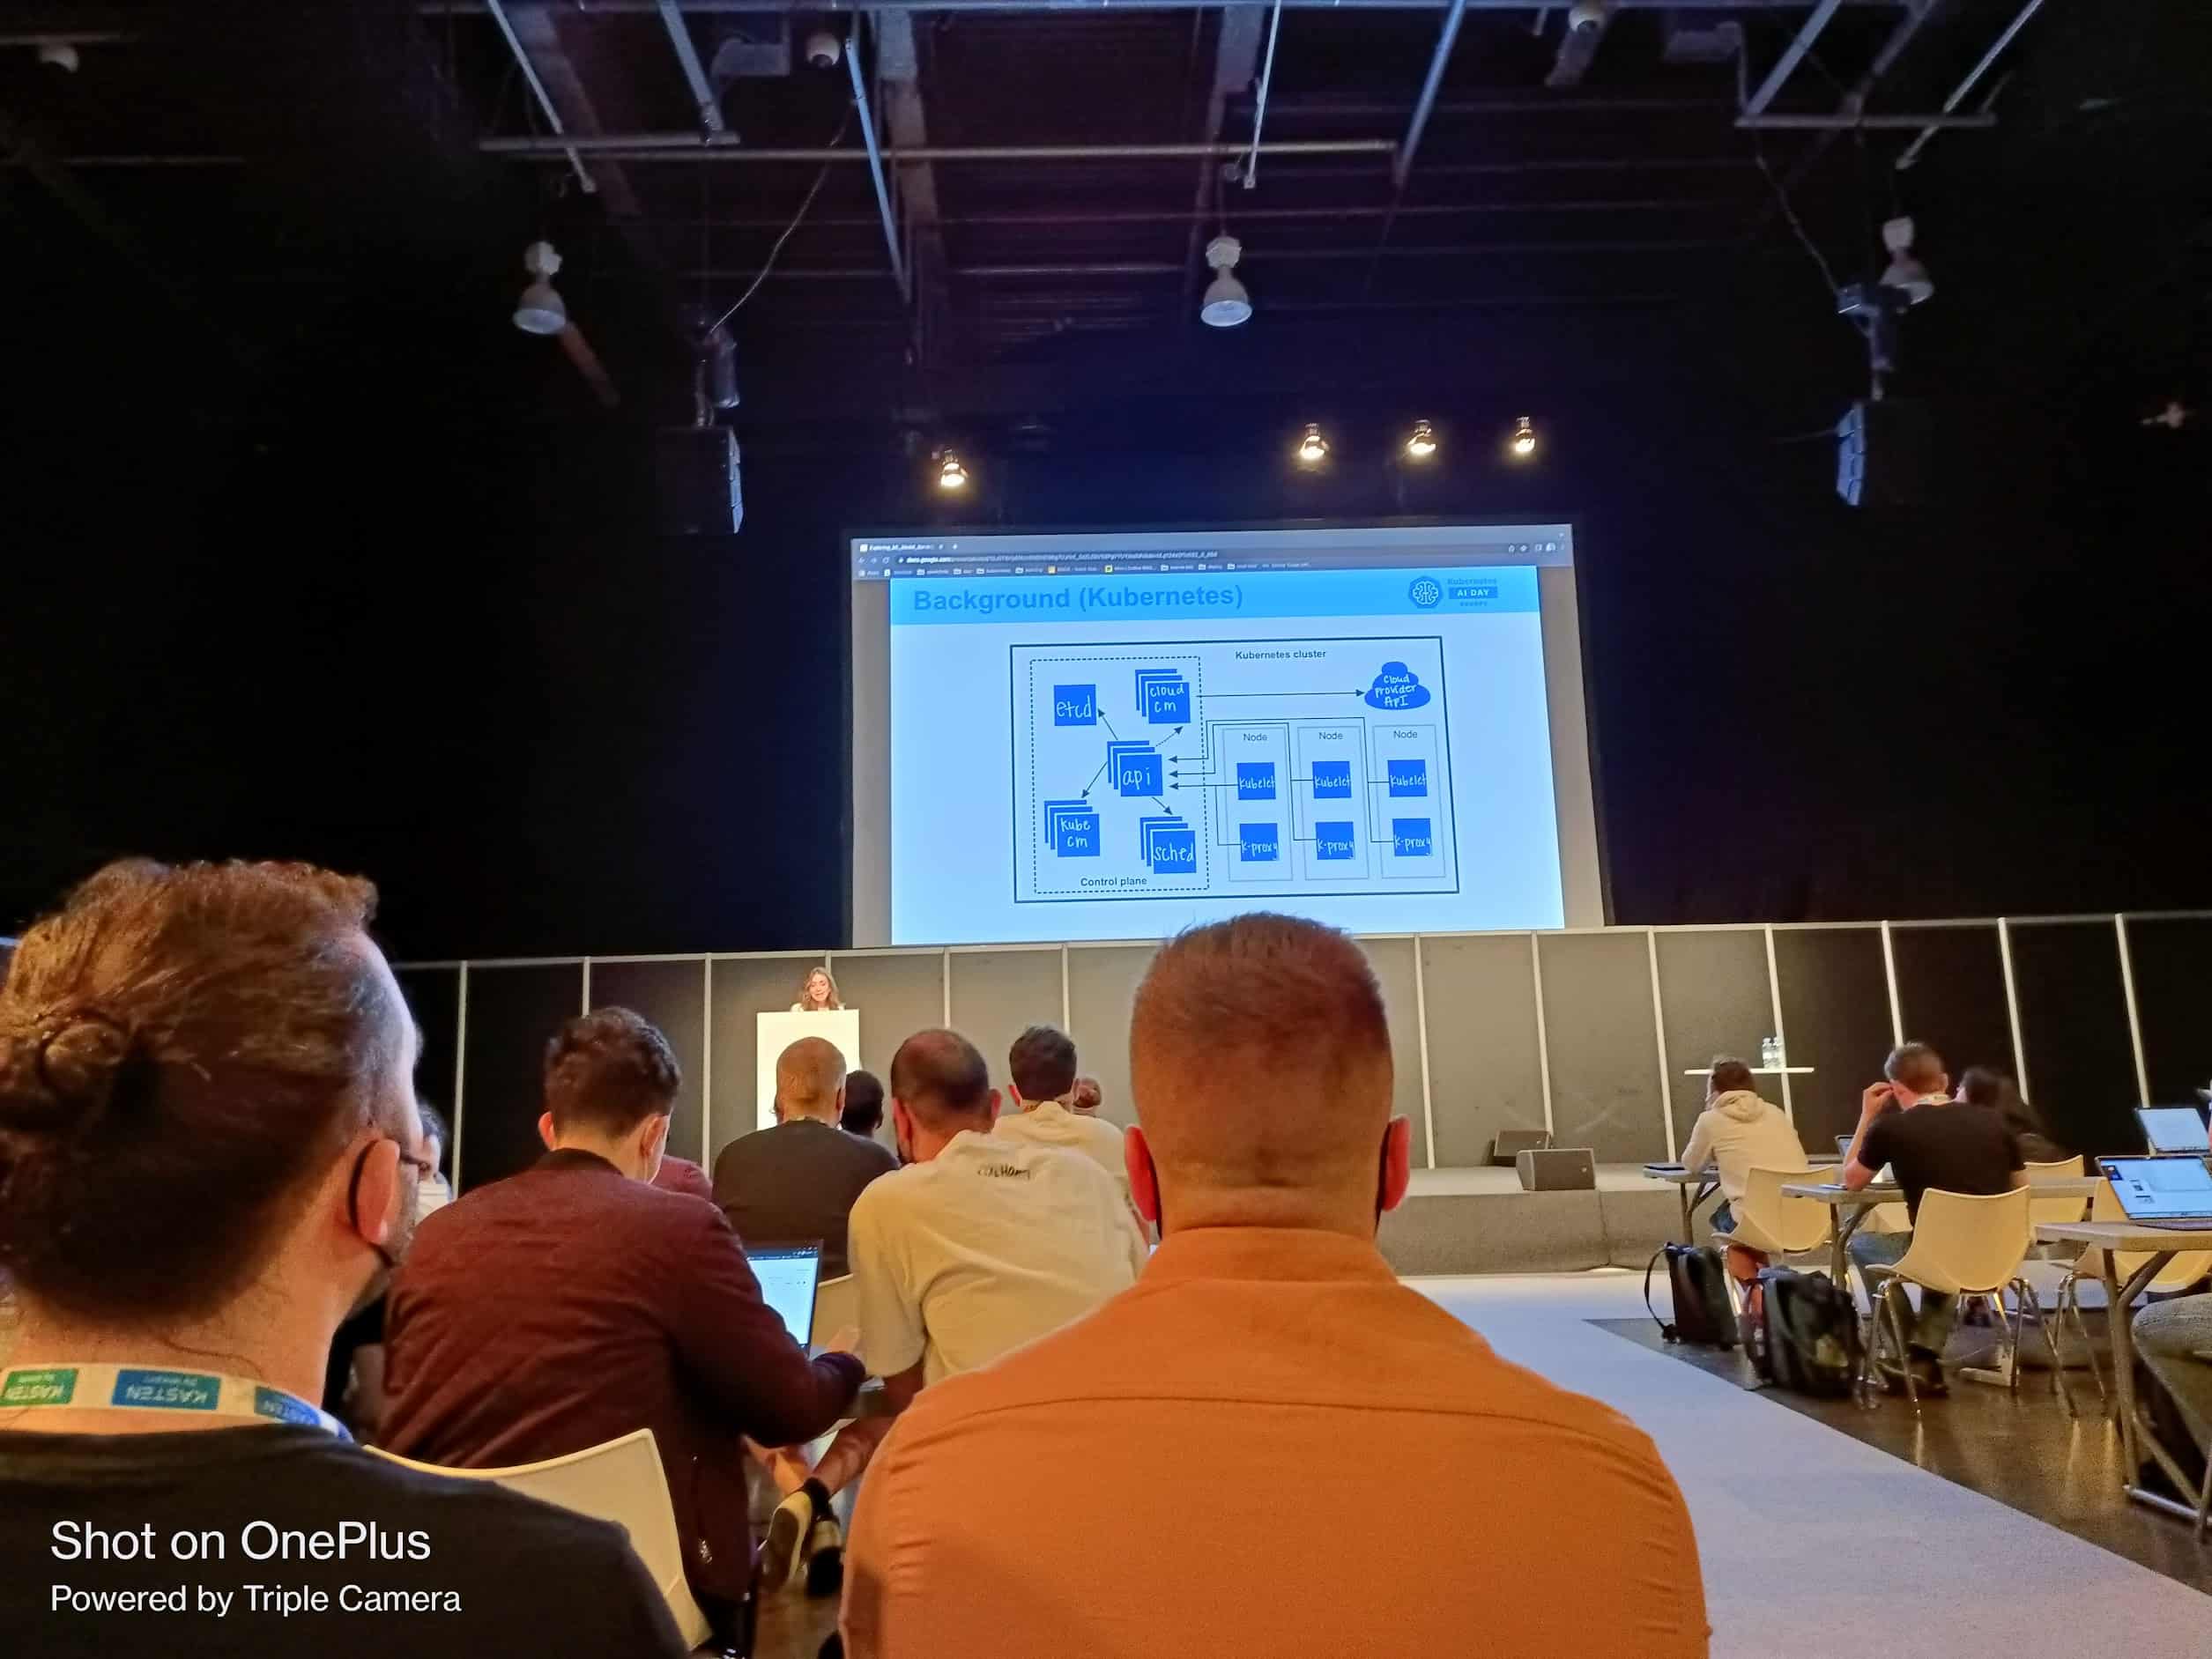 A lady presenting Background (Kubernetes) in front off audience with laptop in the hall